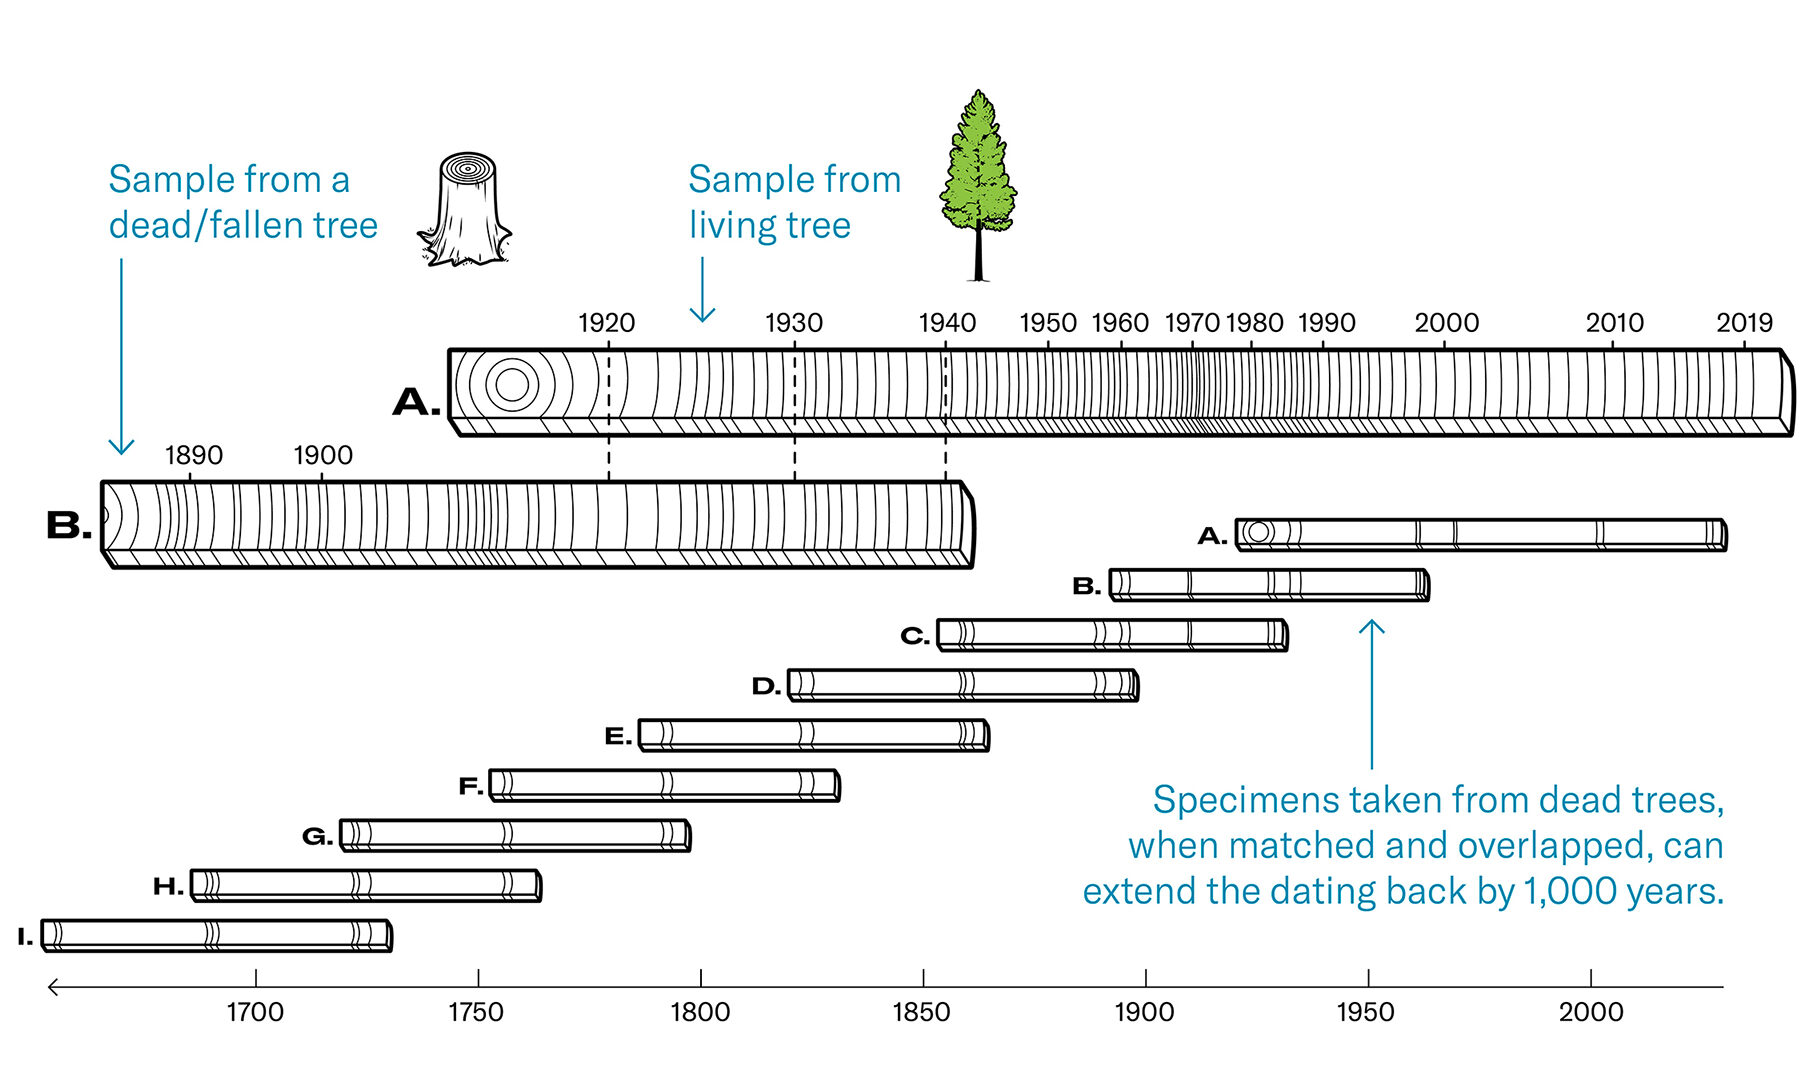 A chart shows a closeup horizontal view of a sample from a living tree, with rings dating back to about 1916. The rings are matched and overlapped with a sample from a dead/fallen tree underneath that dates back to the 1880s. The living tree sample appears again in a zoomed out just to the right, along with eight specimens taken from dead trees (labelled B to I), matched and overlapped one on top of another, with the earliest dating back prior to 1700. This method can extend the dating back by 1,000 years.